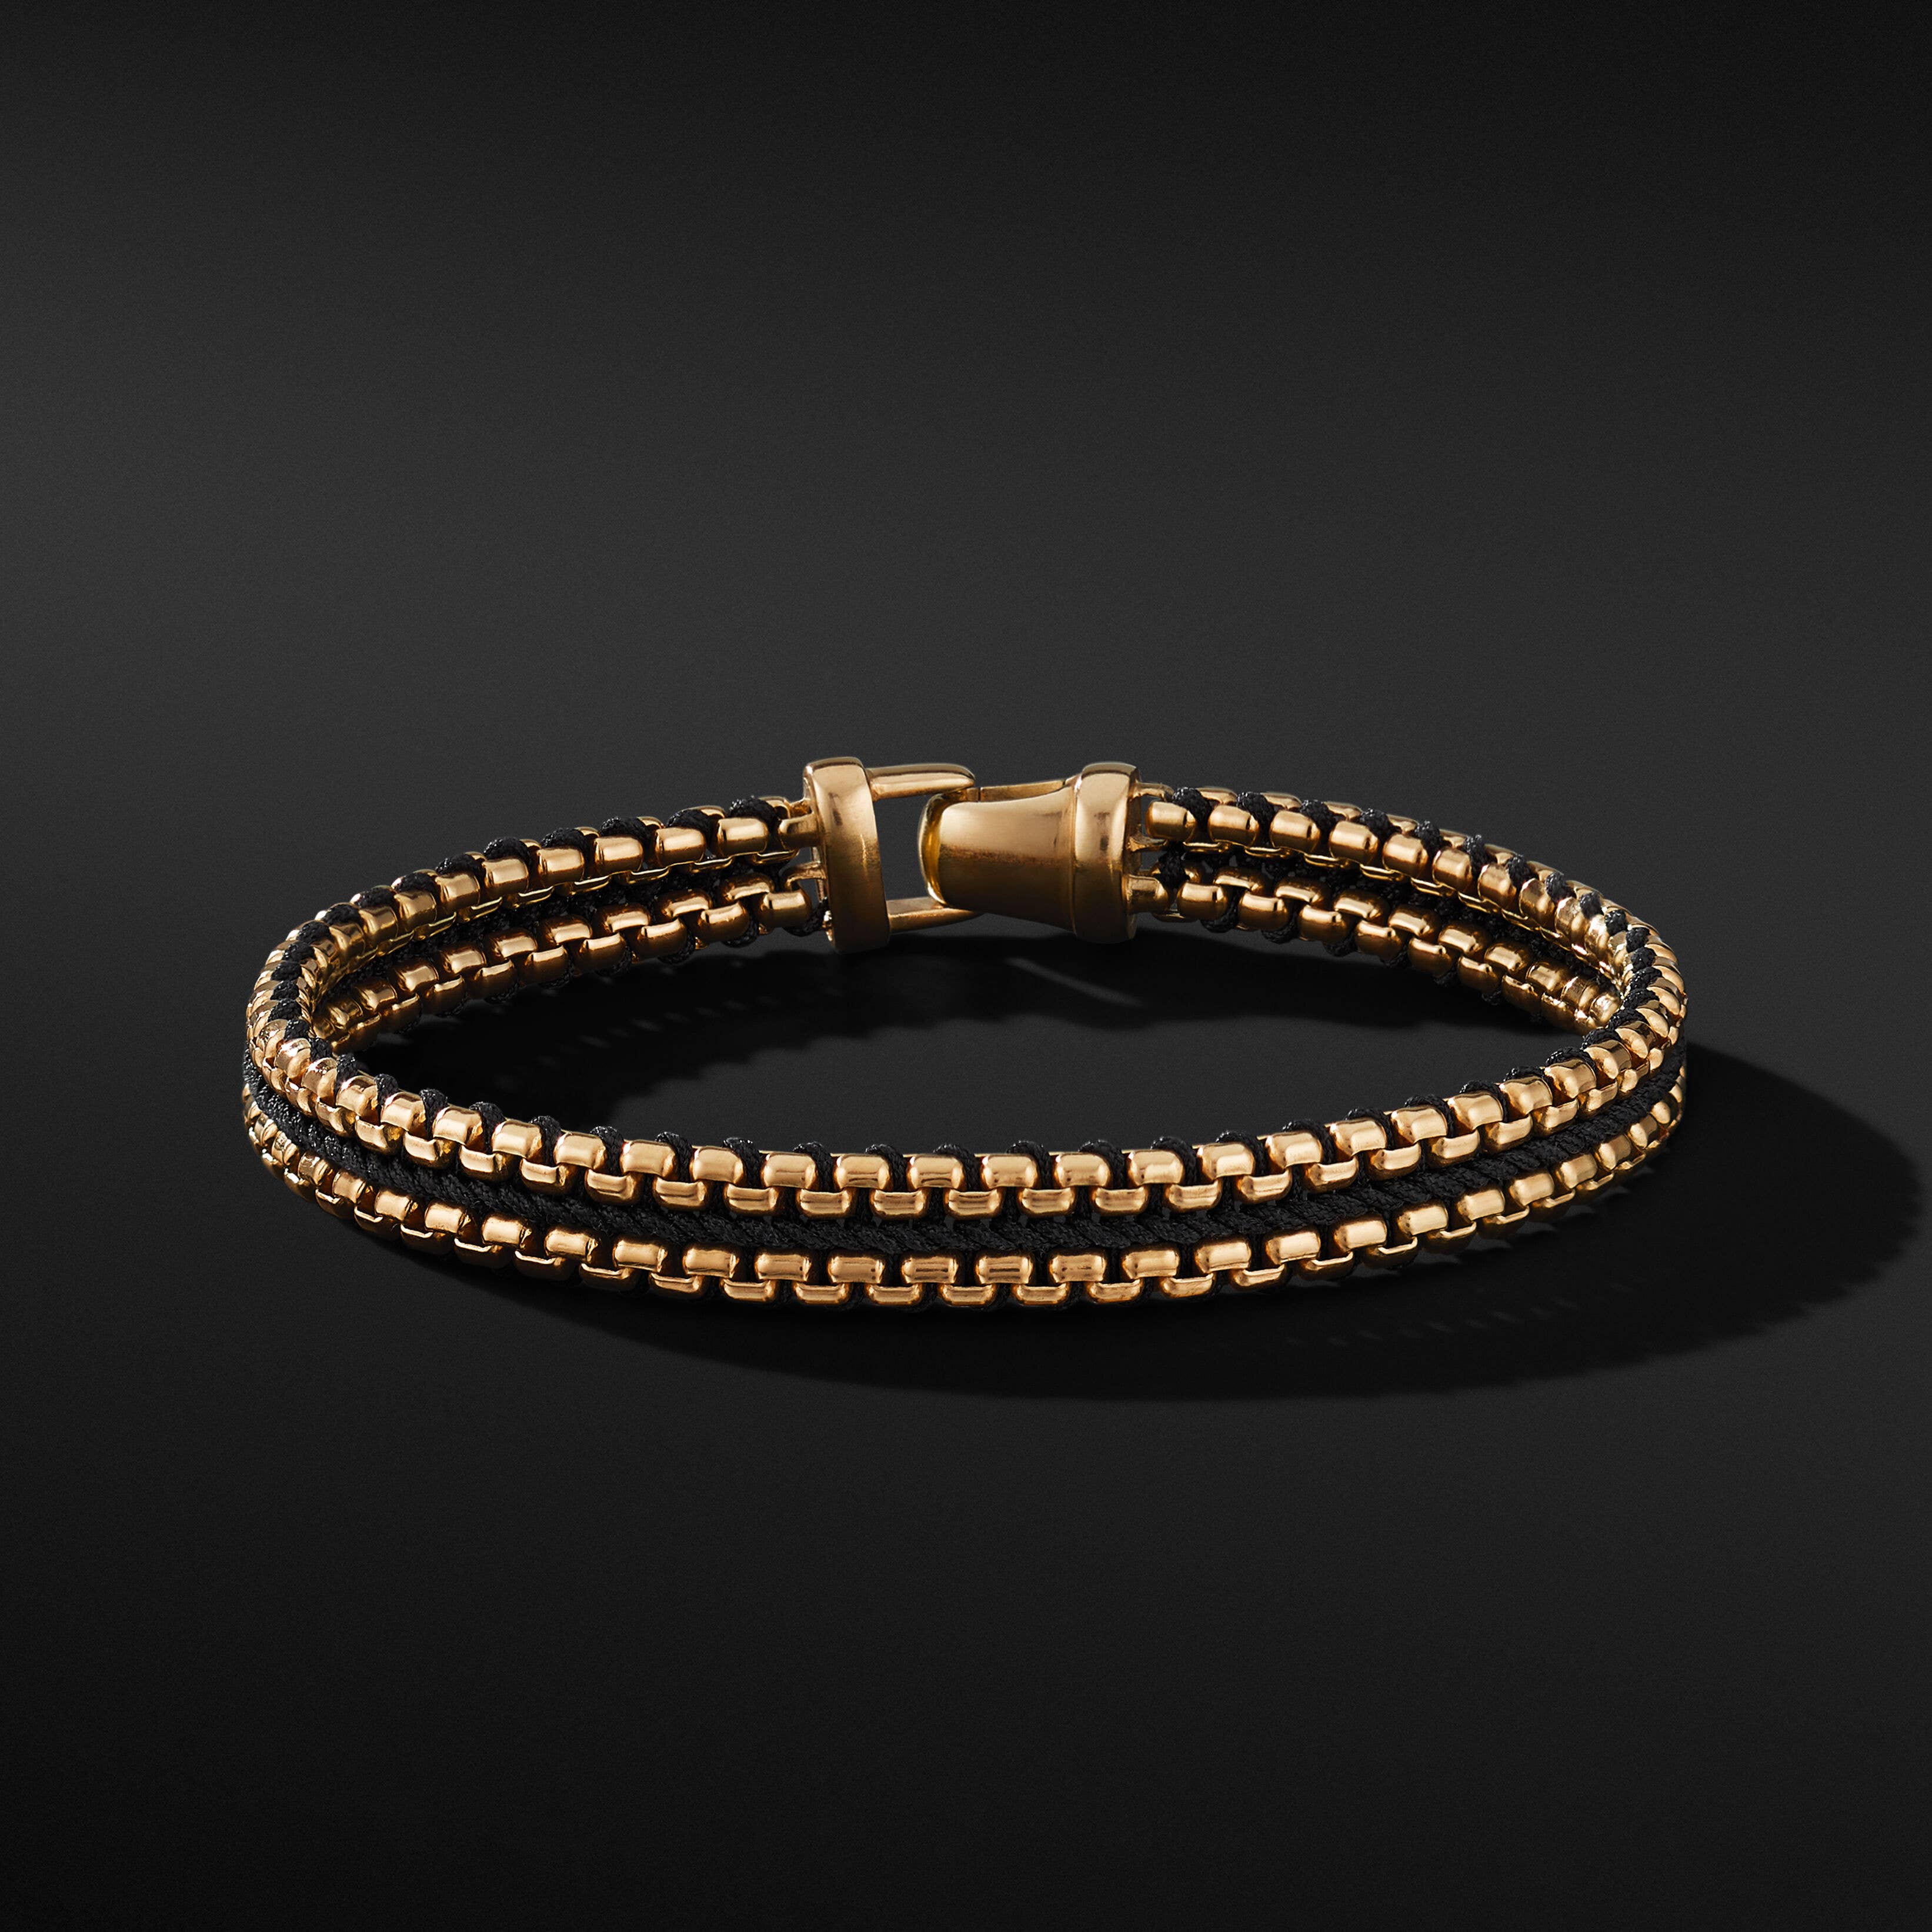 Woven Box Chain Bracelet with Black Nylon and 18K Yellow Gold